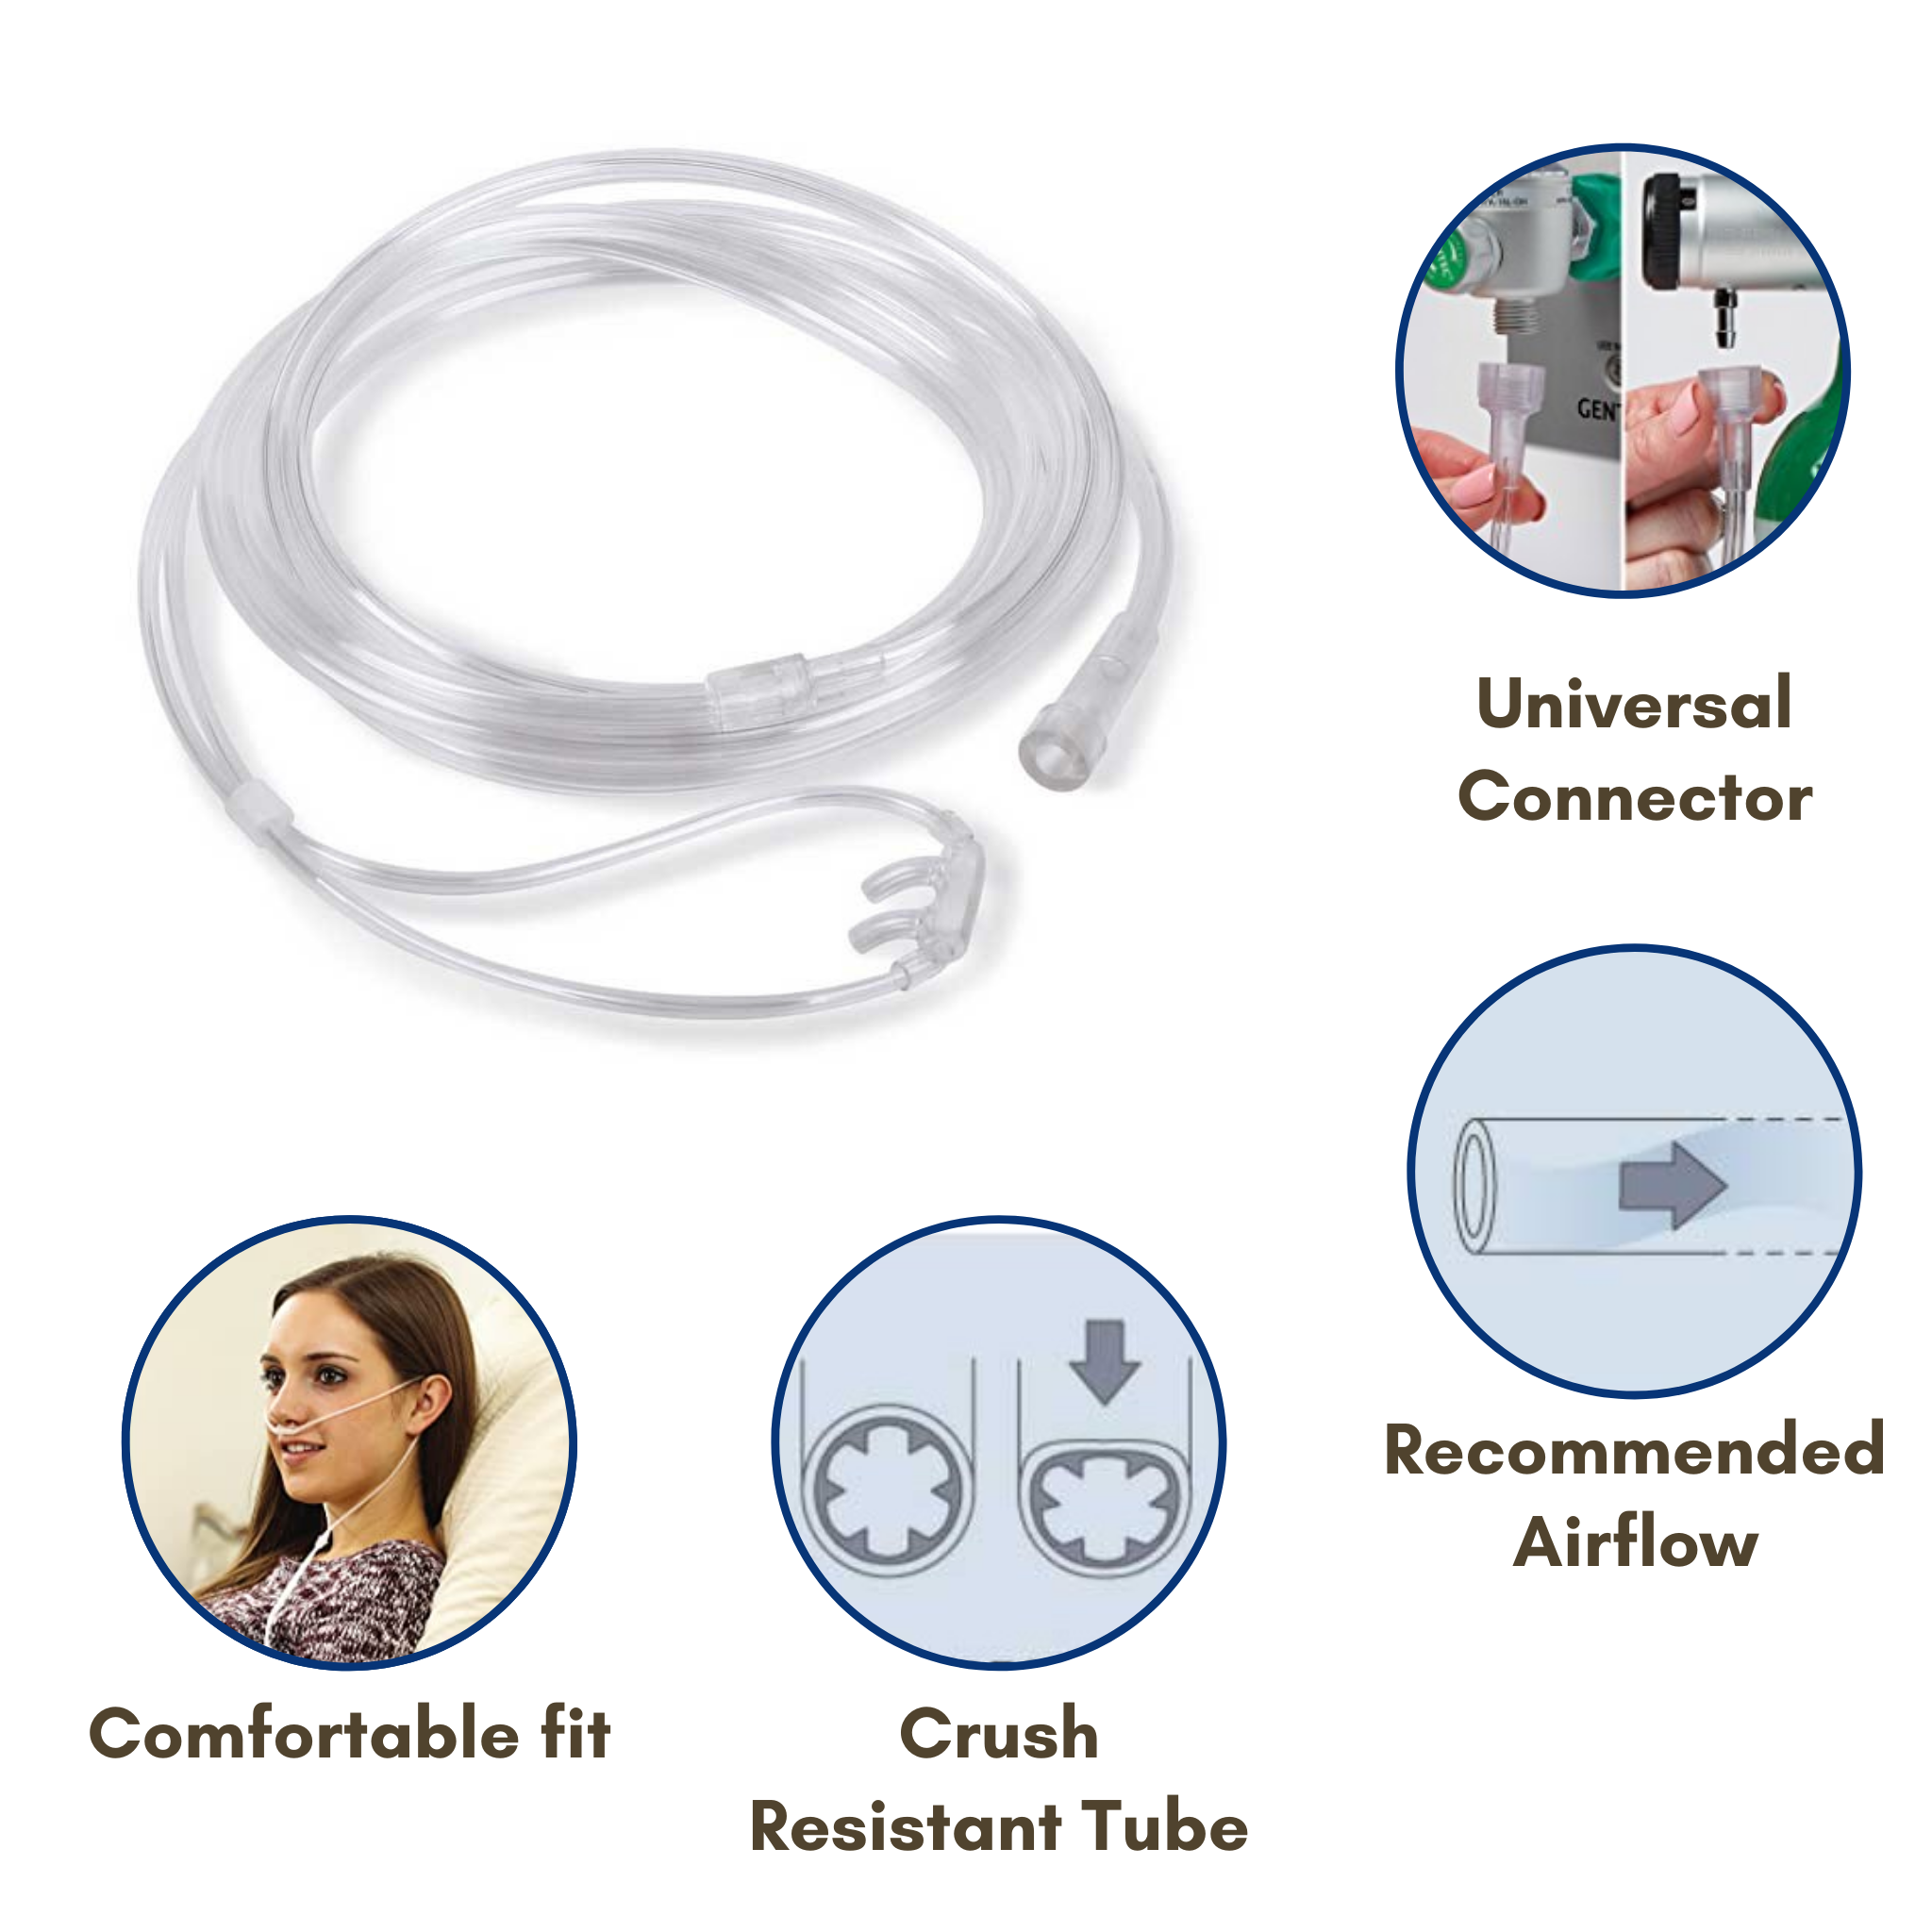 Nasal Cannula has crush resistant tube with universal connector is available in AeonCare from Chennai